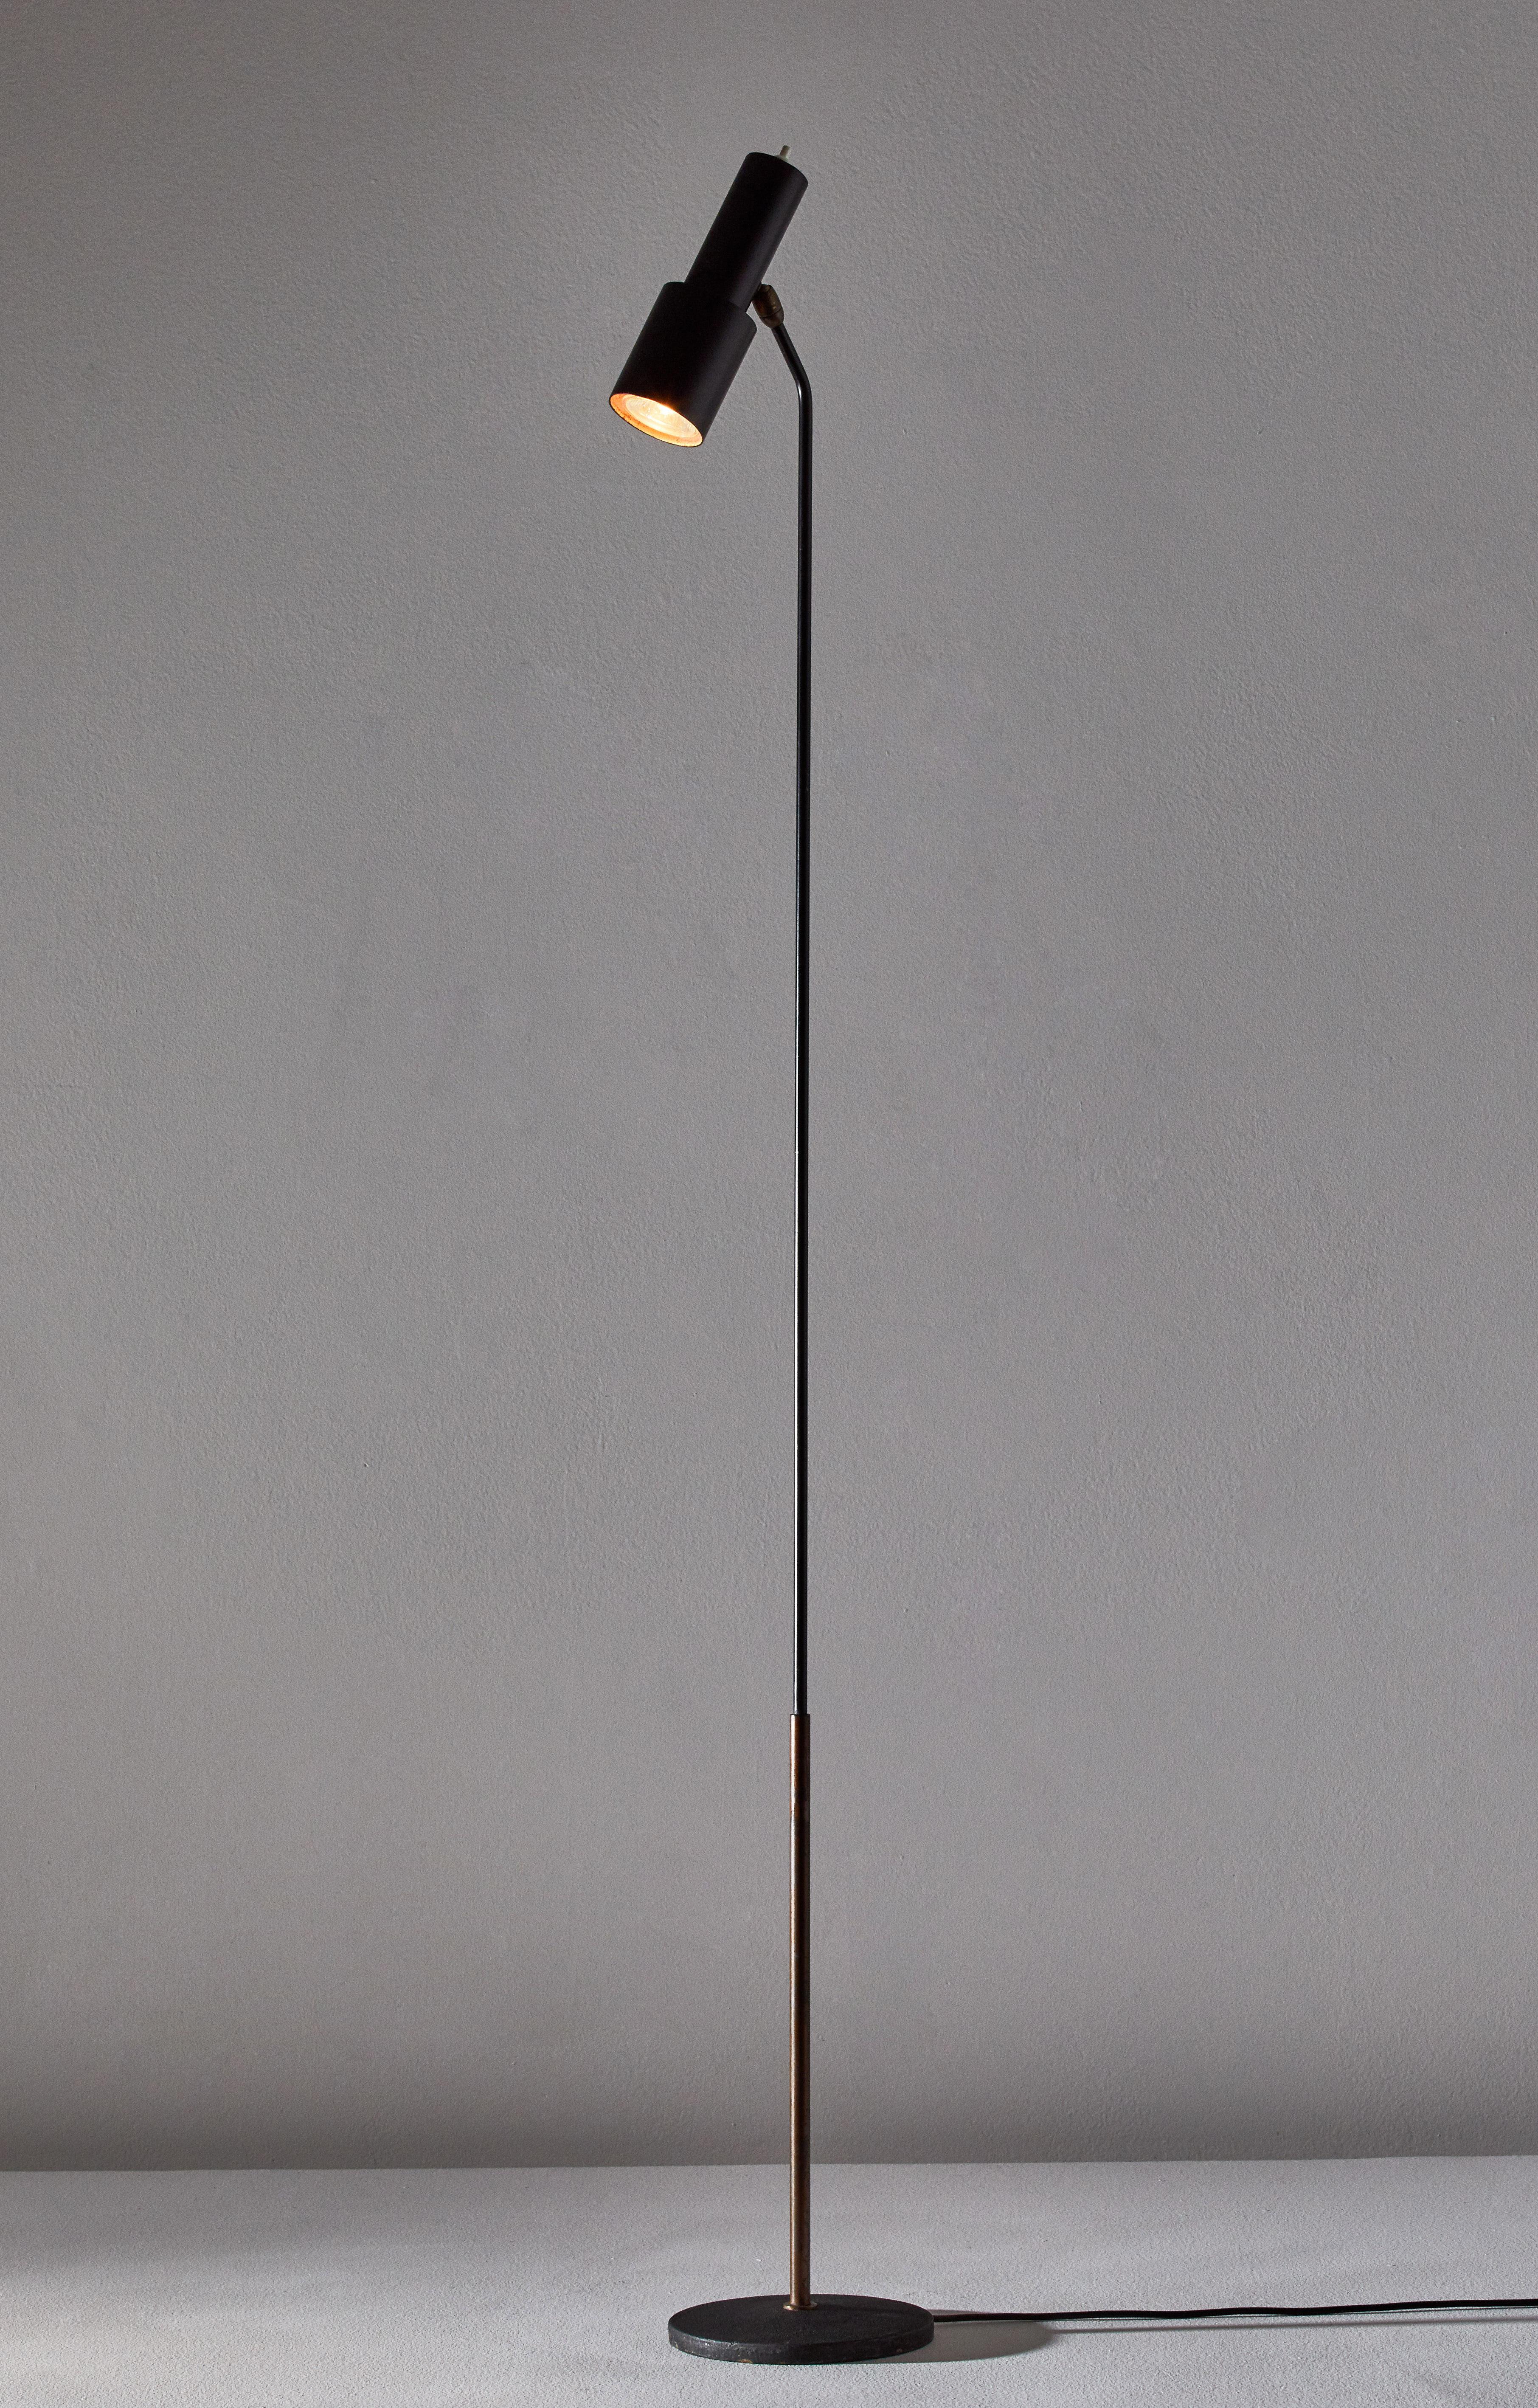 Floor lamp by Fontana Arte. Manufactured in Italy, circa 1950s. Enameled metal, brass, glass. Original cord. Shade adjust to various positions. Takes one E27 60W maximum bulb. Bulb provided as a onetime courtesy. Literature: Bibliography Quaderni di